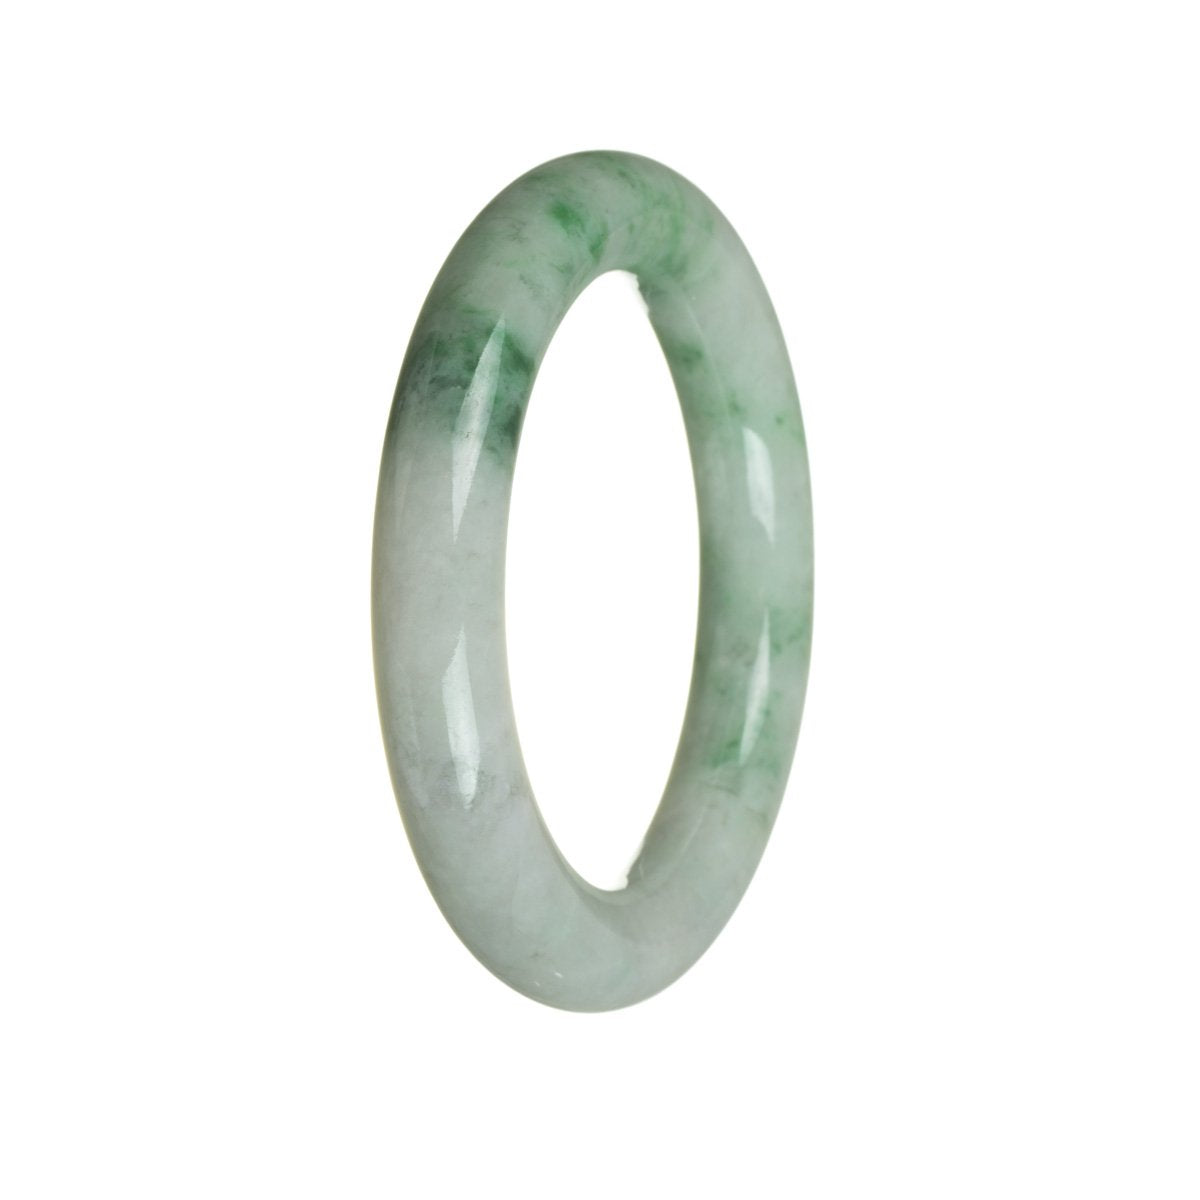 Close-up of a round, white jadeite bracelet with a smooth, polished surface. The bracelet is made of authentic Grade A white jadeite, known for its high quality and stunning beauty.